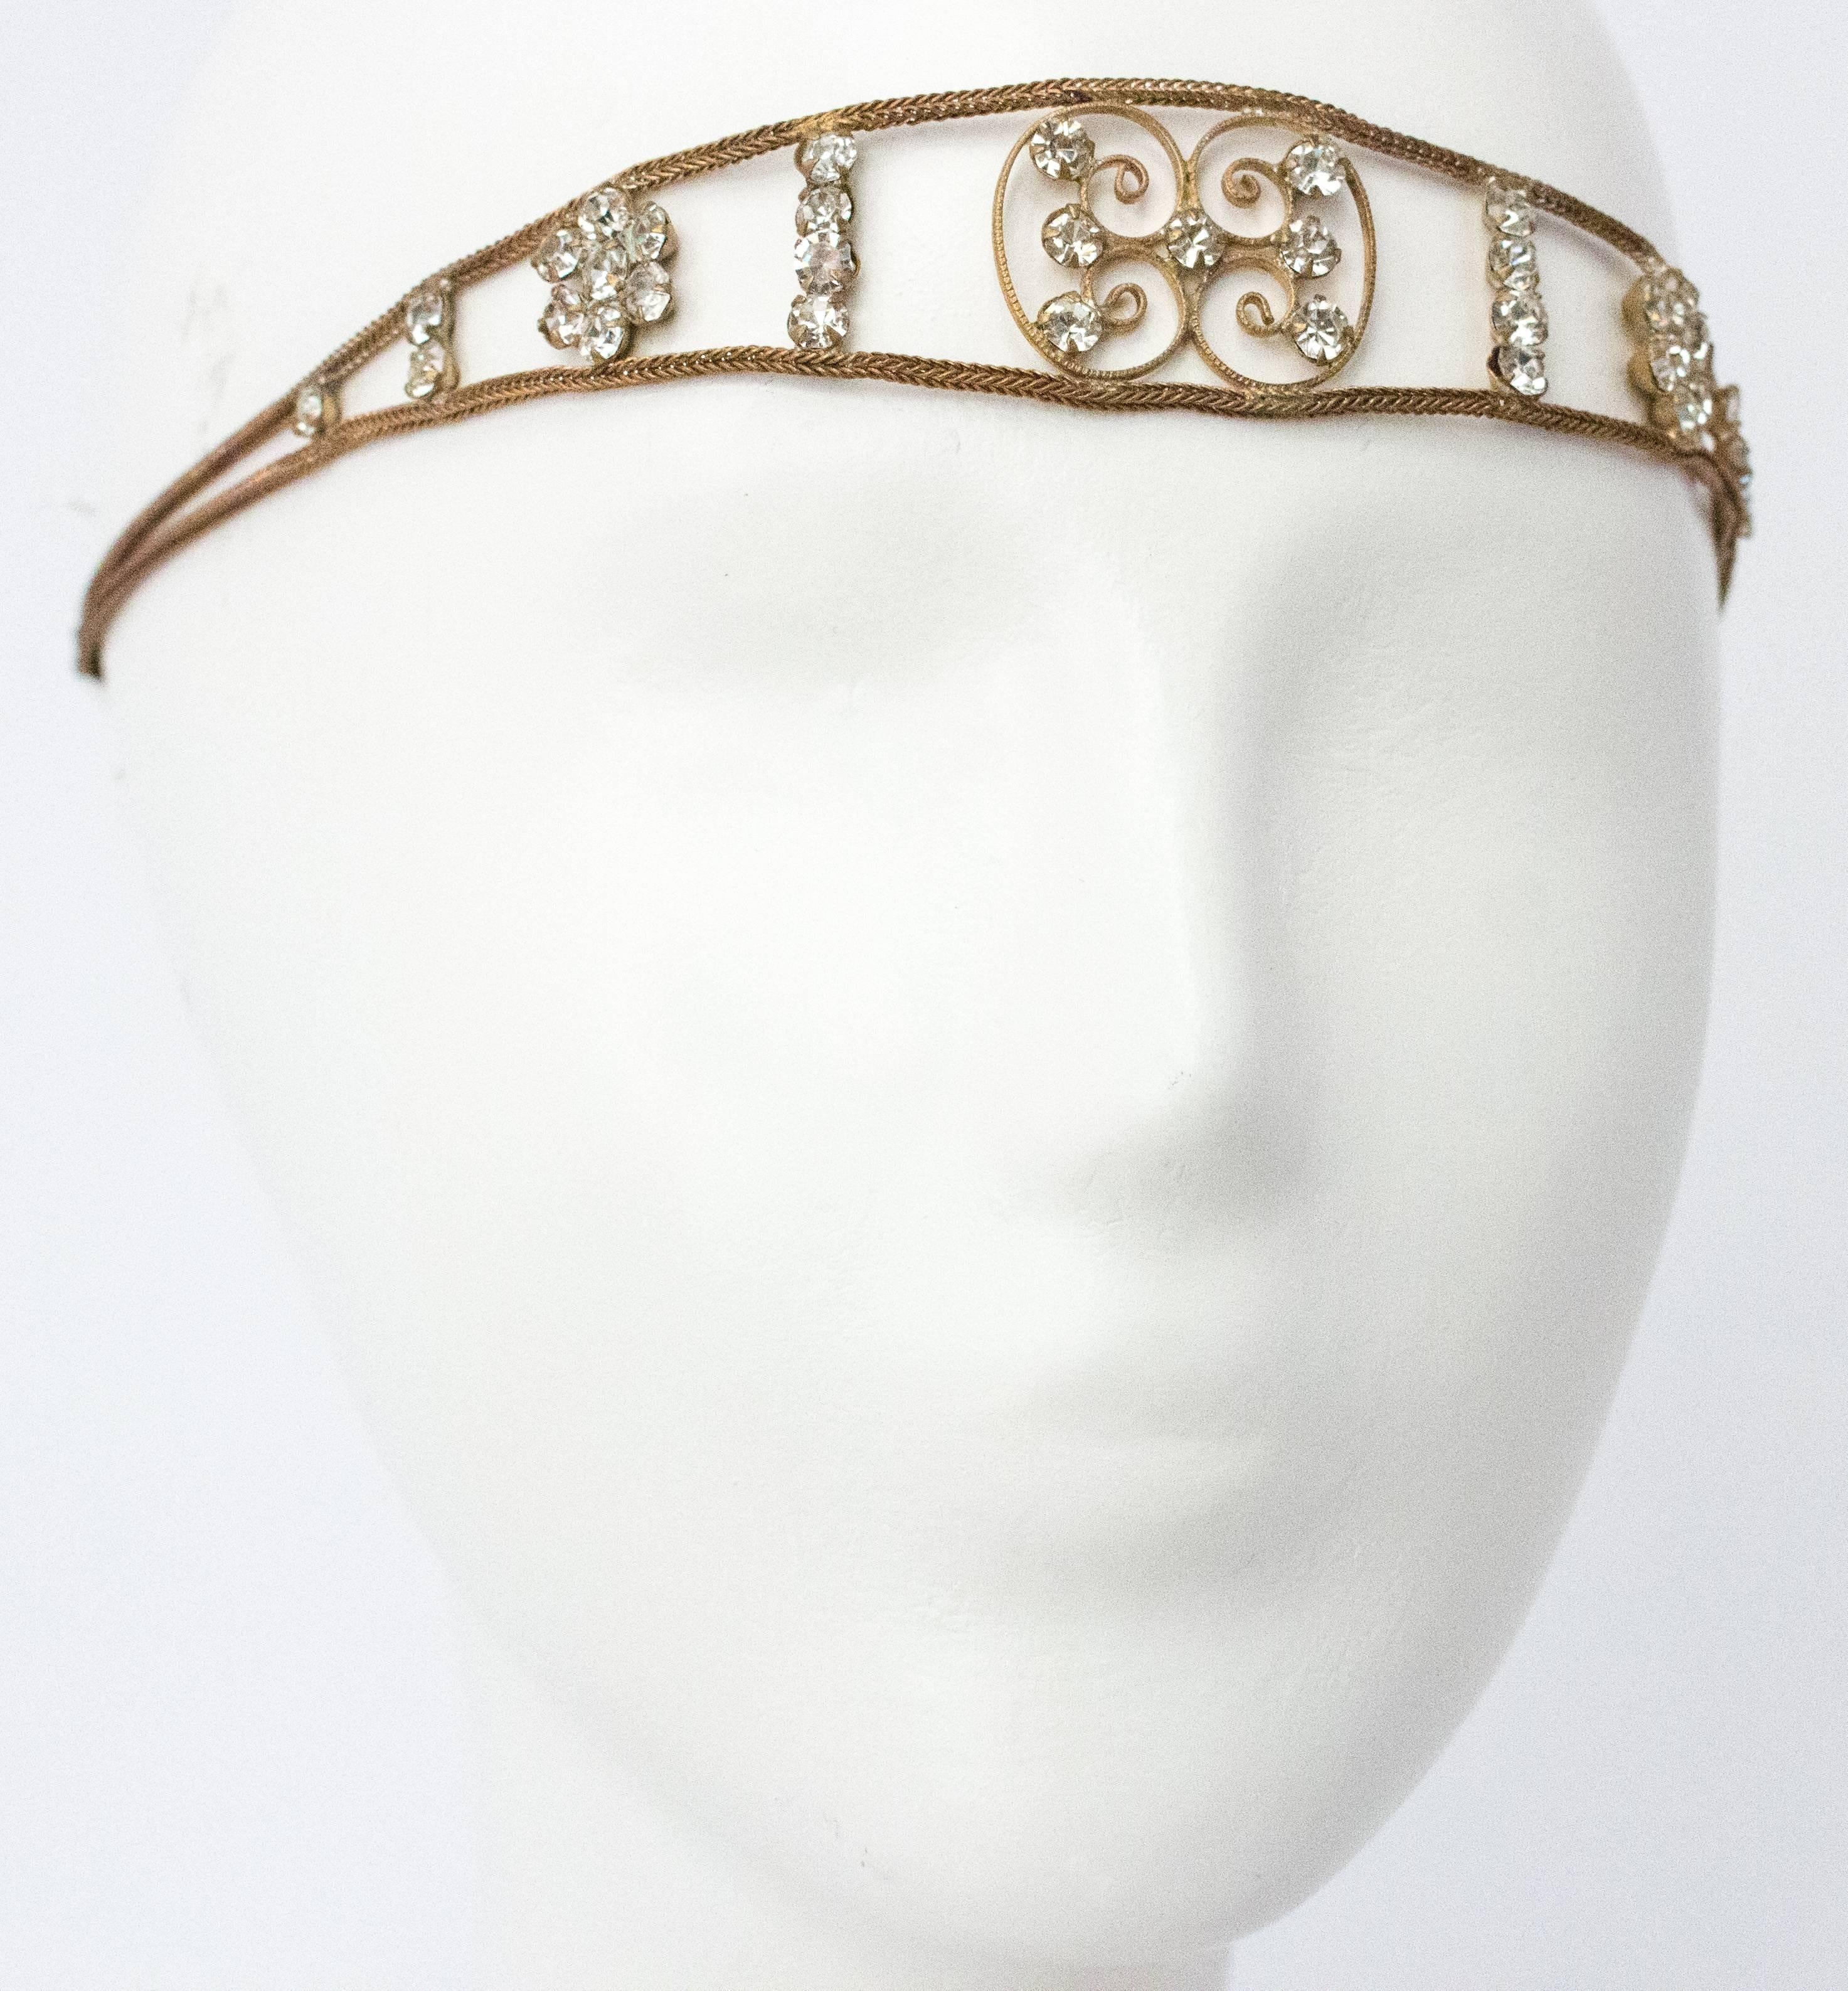 20s headpiece has gold lamé braided ribbon which ties in the back so it is completely adjustable